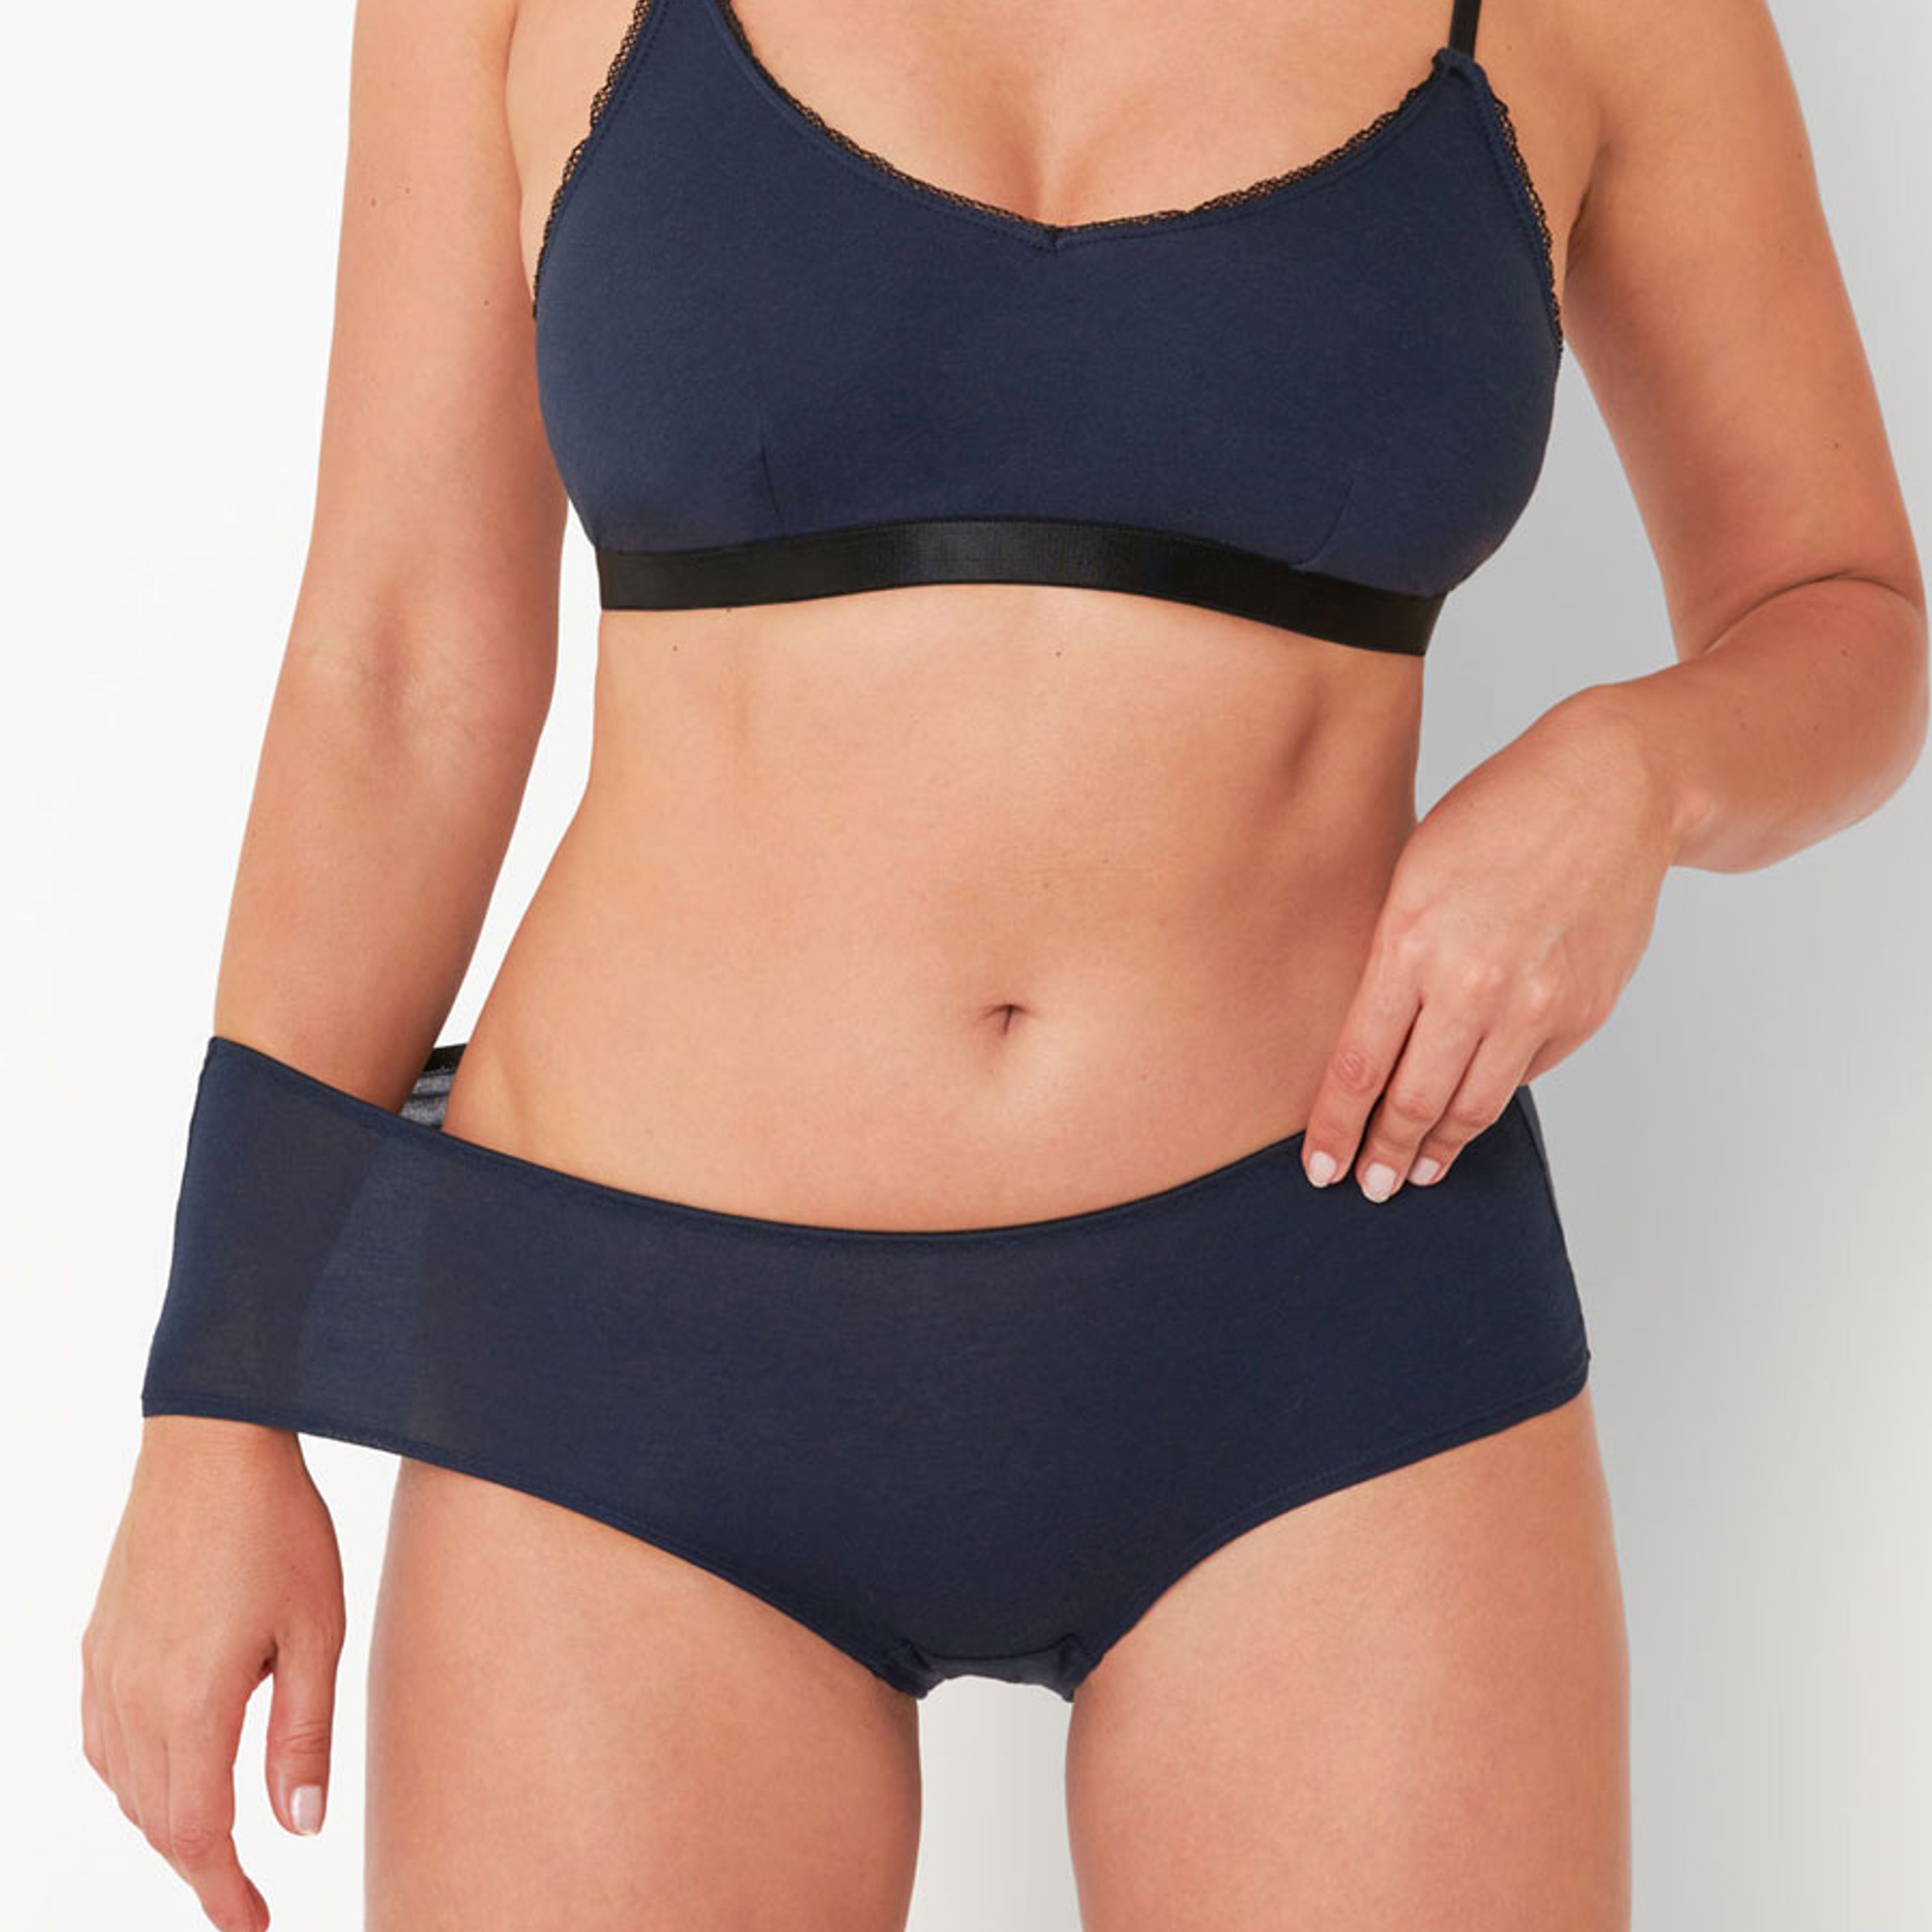 https://cdn.prod.marmalade.co/products/3840x3840/filters:quality(80)/www.lovesuze.com%2Fproducts%2Fcomfort-stretch-cotton-brief-midnight-blue%2F1637622352%2FComfort_Stretch_Cotton_Brief_Navy_055_900x_52a226e4-c5ea-44c8-8840-7d4b488af87f.jpg